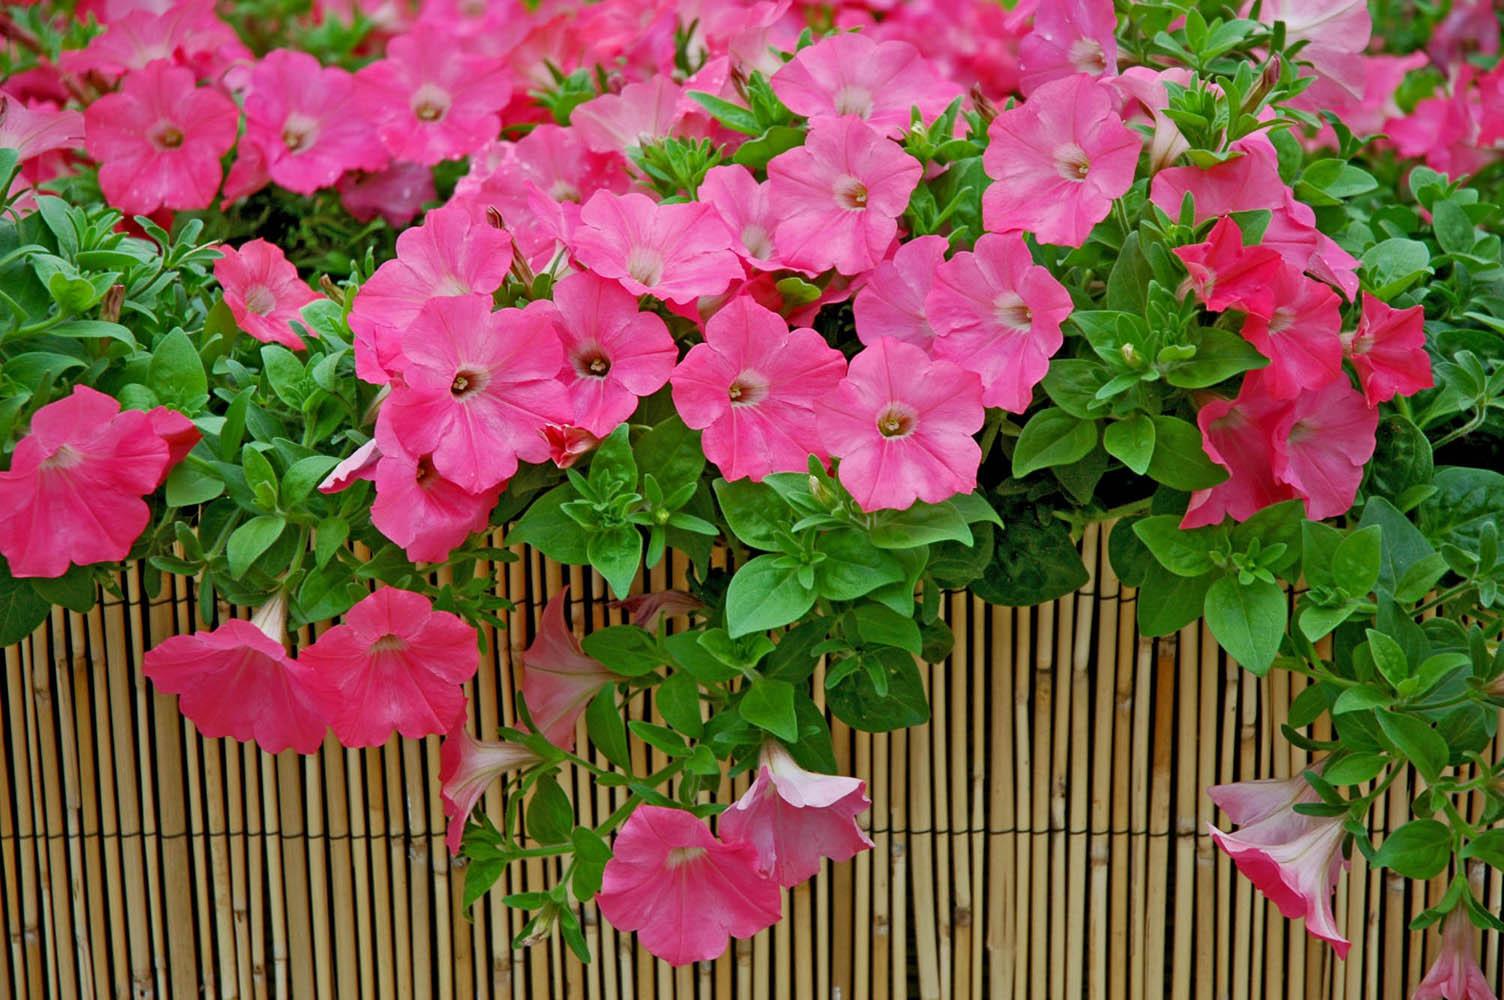 The Wave petunias will be popular again in 2007, including this Easy Wave Coral Reef. The color coral on this petunia is rich and saturated.